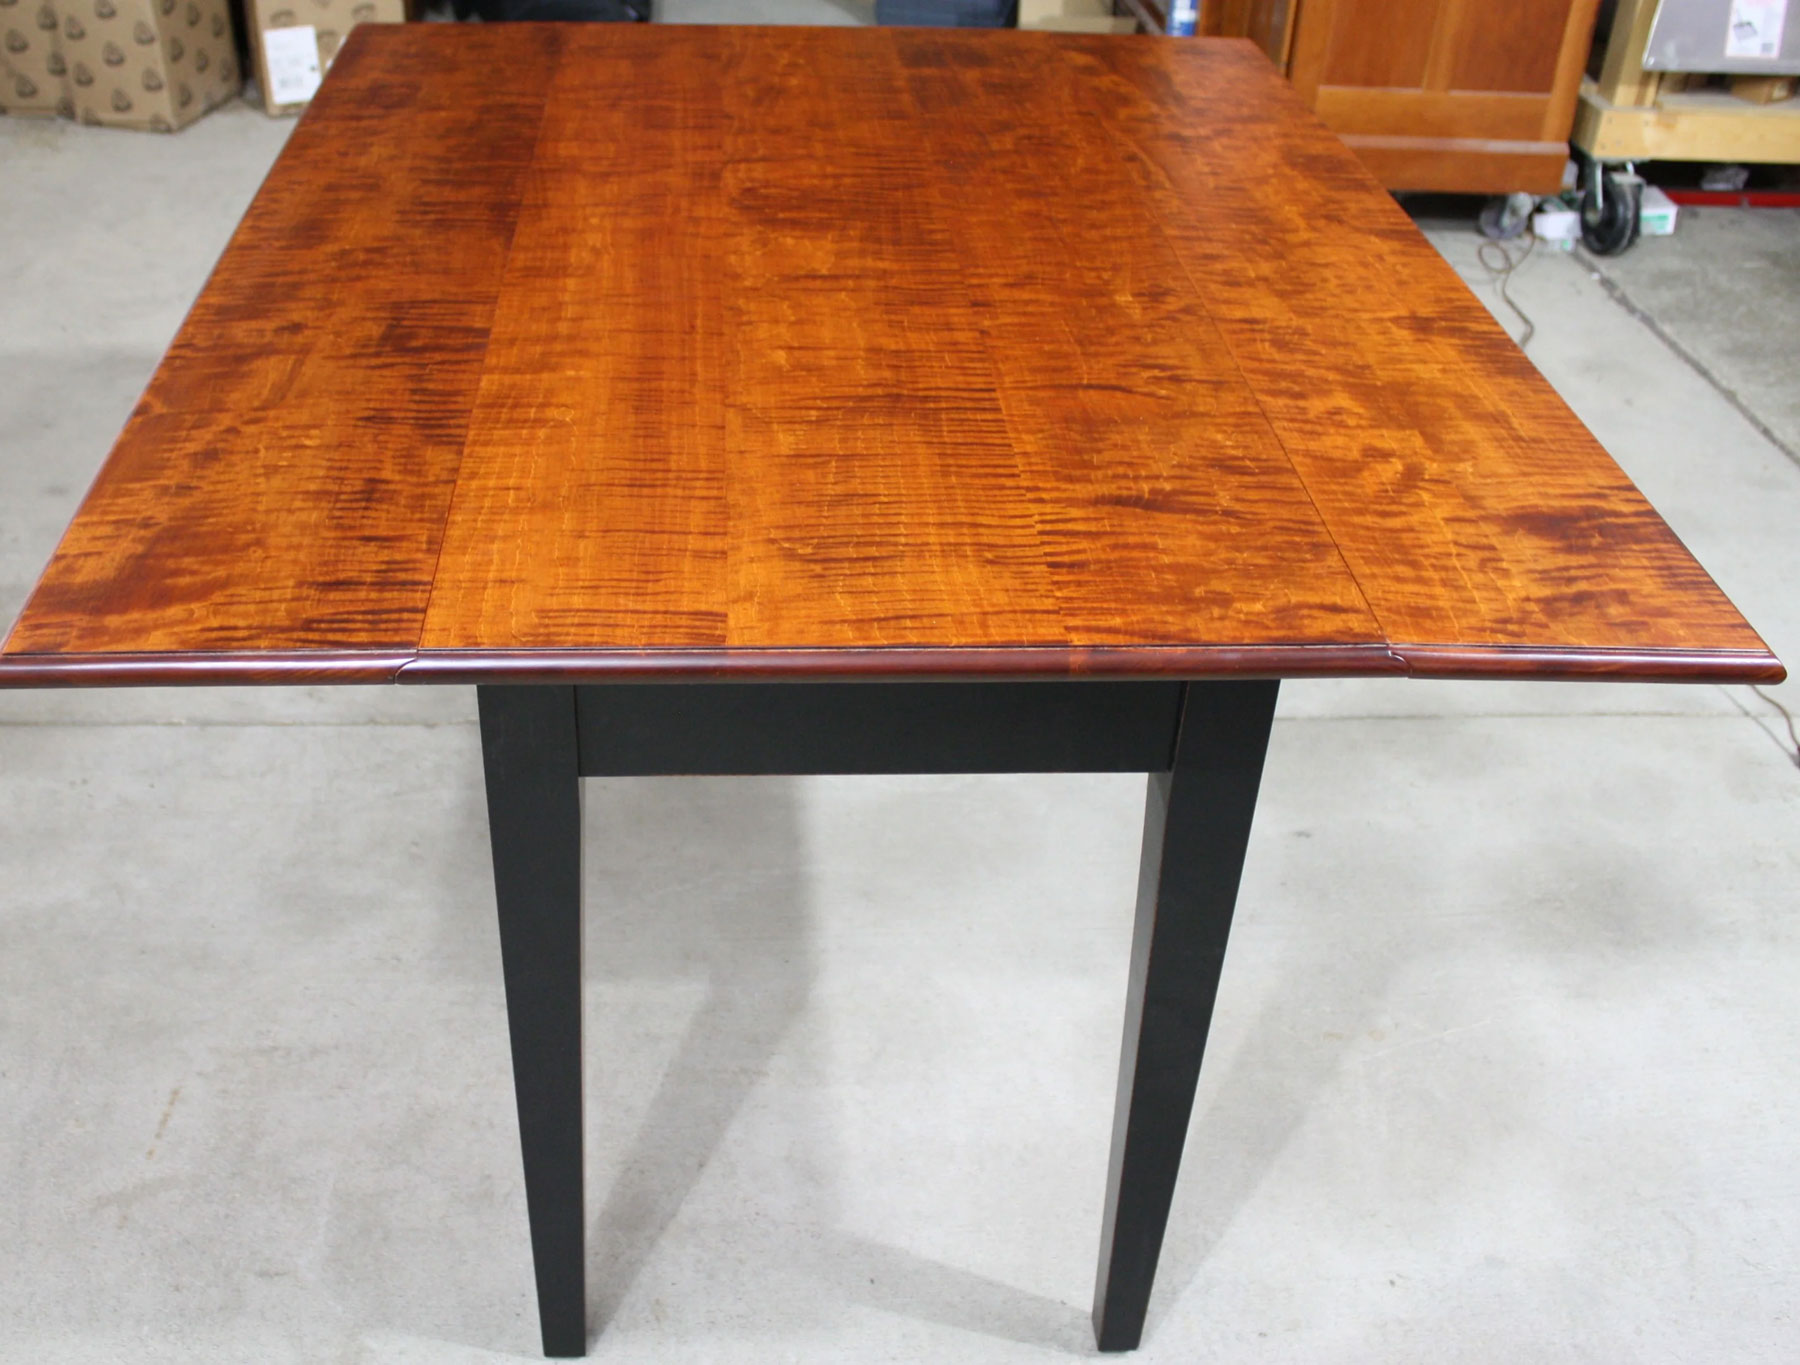 Treharn Harvest Drop Leaf Leg Table with Tiger Maple Top